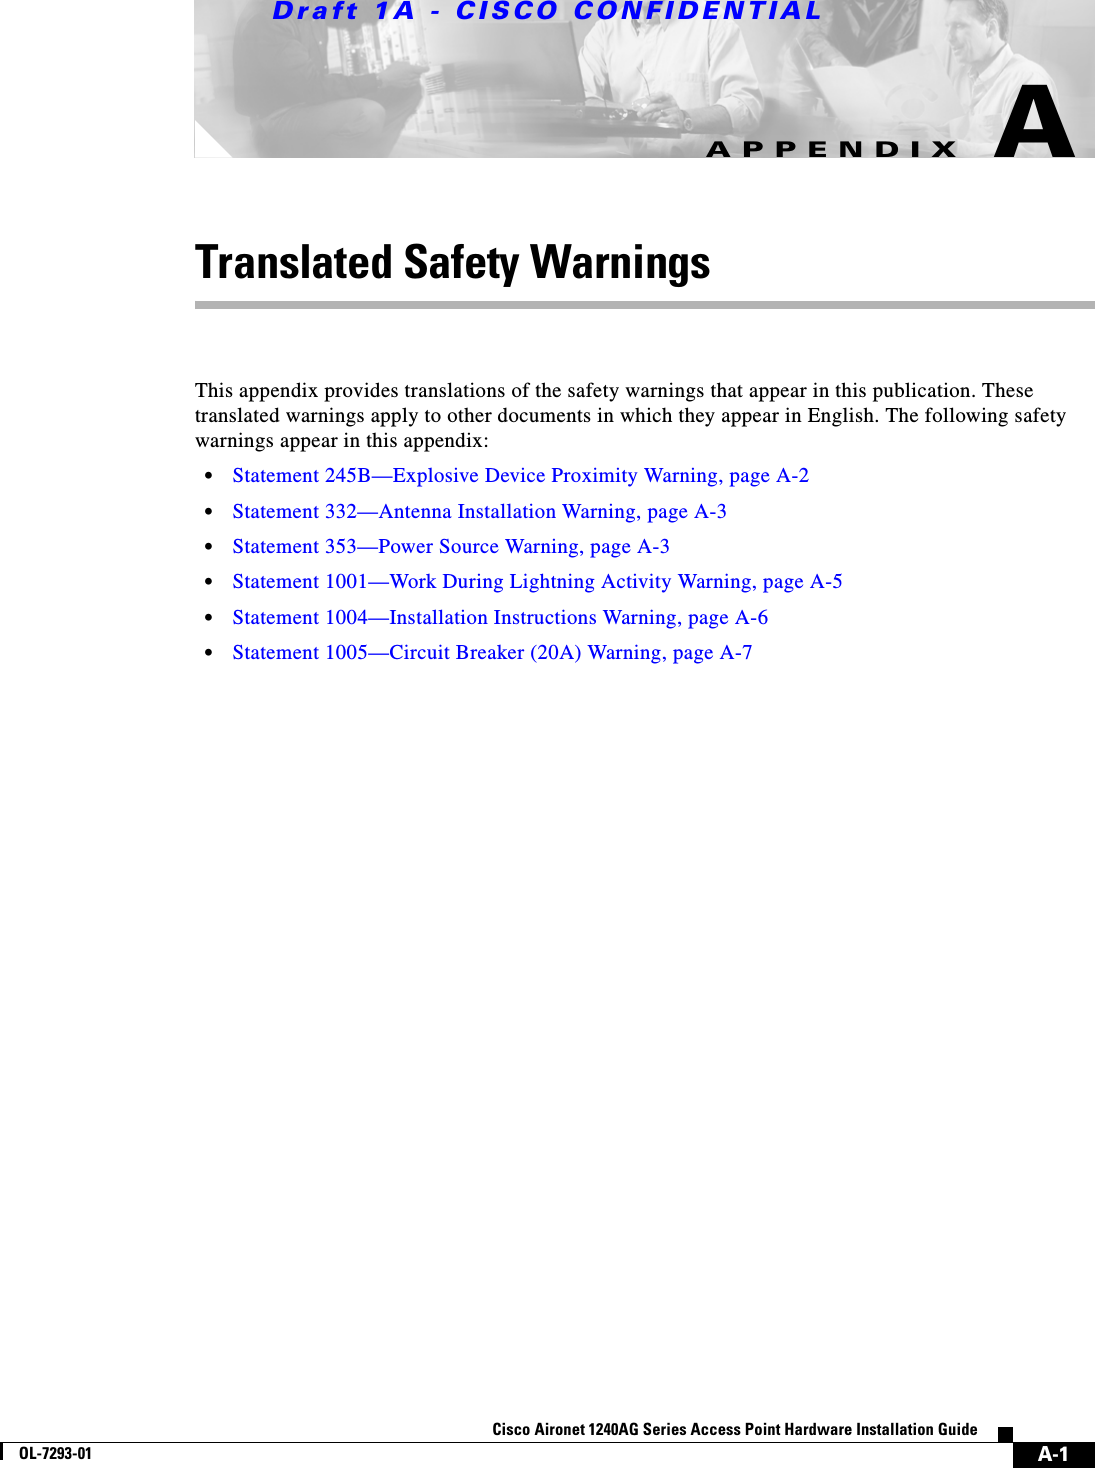 Draft 1A - CISCO CONFIDENTIALA-1Cisco Aironet 1240AG Series Access Point Hardware Installation GuideOL-7293-01APPENDIXATranslated Safety WarningsThis appendix provides translations of the safety warnings that appear in this publication. These translated warnings apply to other documents in which they appear in English. The following safety warnings appear in this appendix:•Statement 245B—Explosive Device Proximity Warning, page A-2•Statement 332—Antenna Installation Warning, page A-3•Statement 353—Power Source Warning, page A-3•Statement 1001—Work During Lightning Activity Warning, page A-5•Statement 1004—Installation Instructions Warning, page A-6•Statement 1005—Circuit Breaker (20A) Warning, page A-7